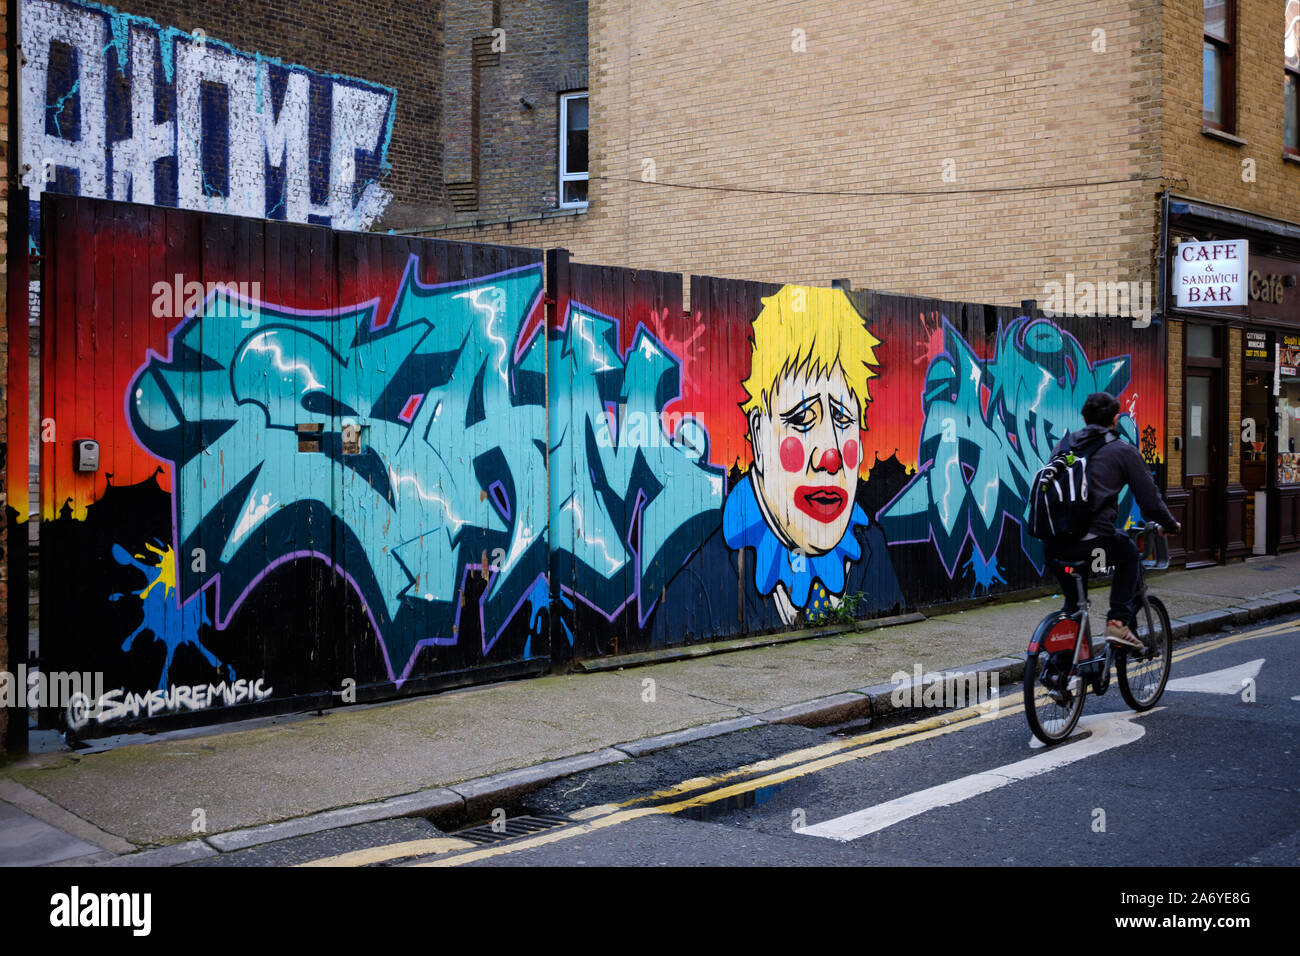 London / UK - October 27th 2019: A typical street in Spittalfields, London with a mural including Boris Johnson as a clown Stock Photo